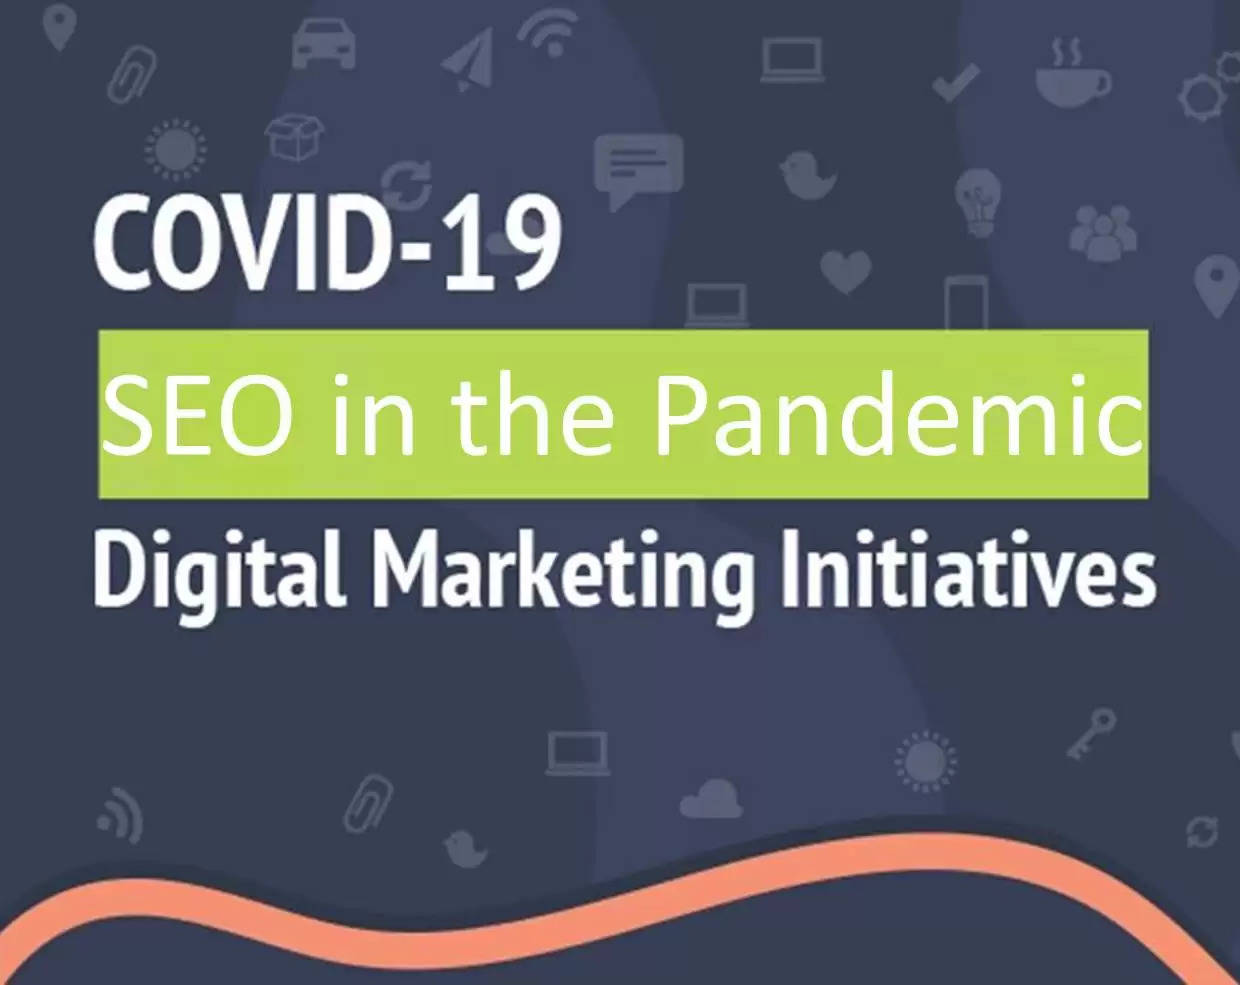 seo and digital marketing importance of digital marketing during the pandemic